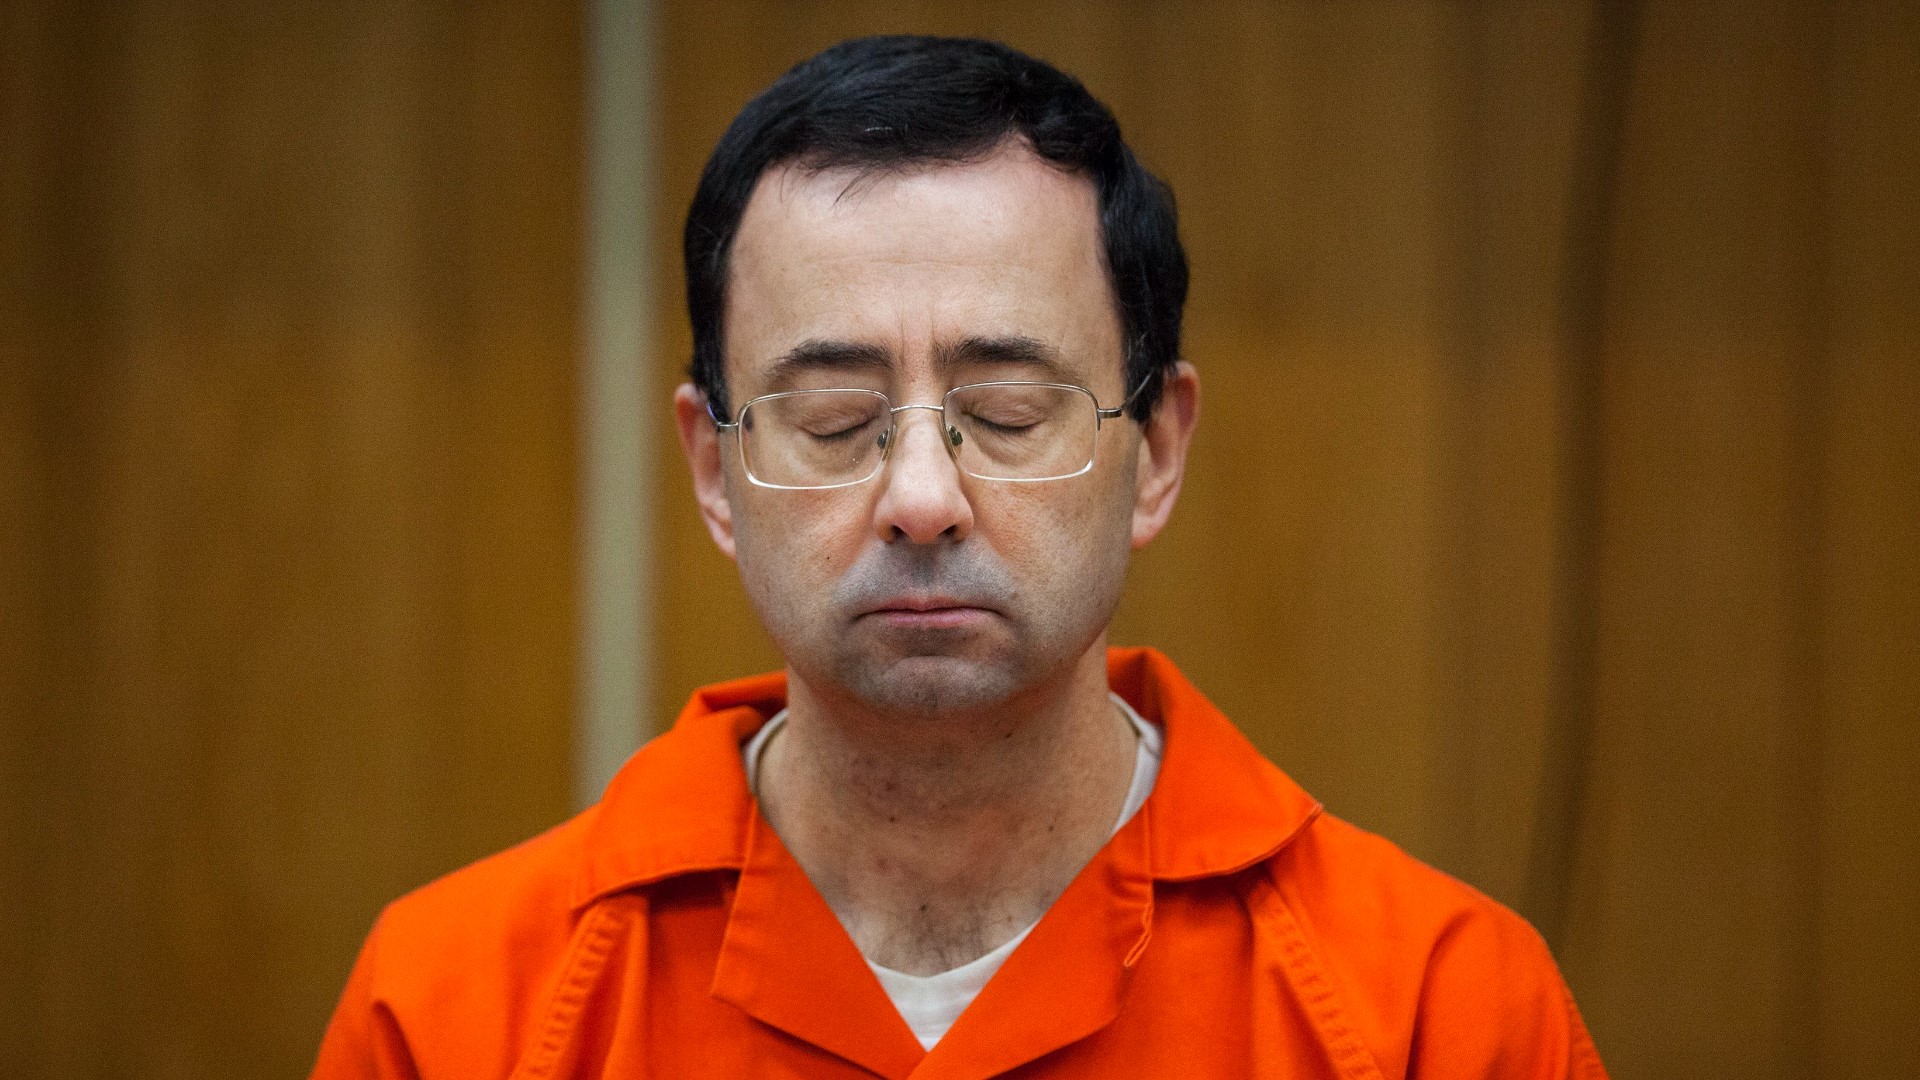 More than 150 women and girls testified during the 2018 sentencing of Nassar, who sexually assaulted gymnasts under the guise of medical treatment.